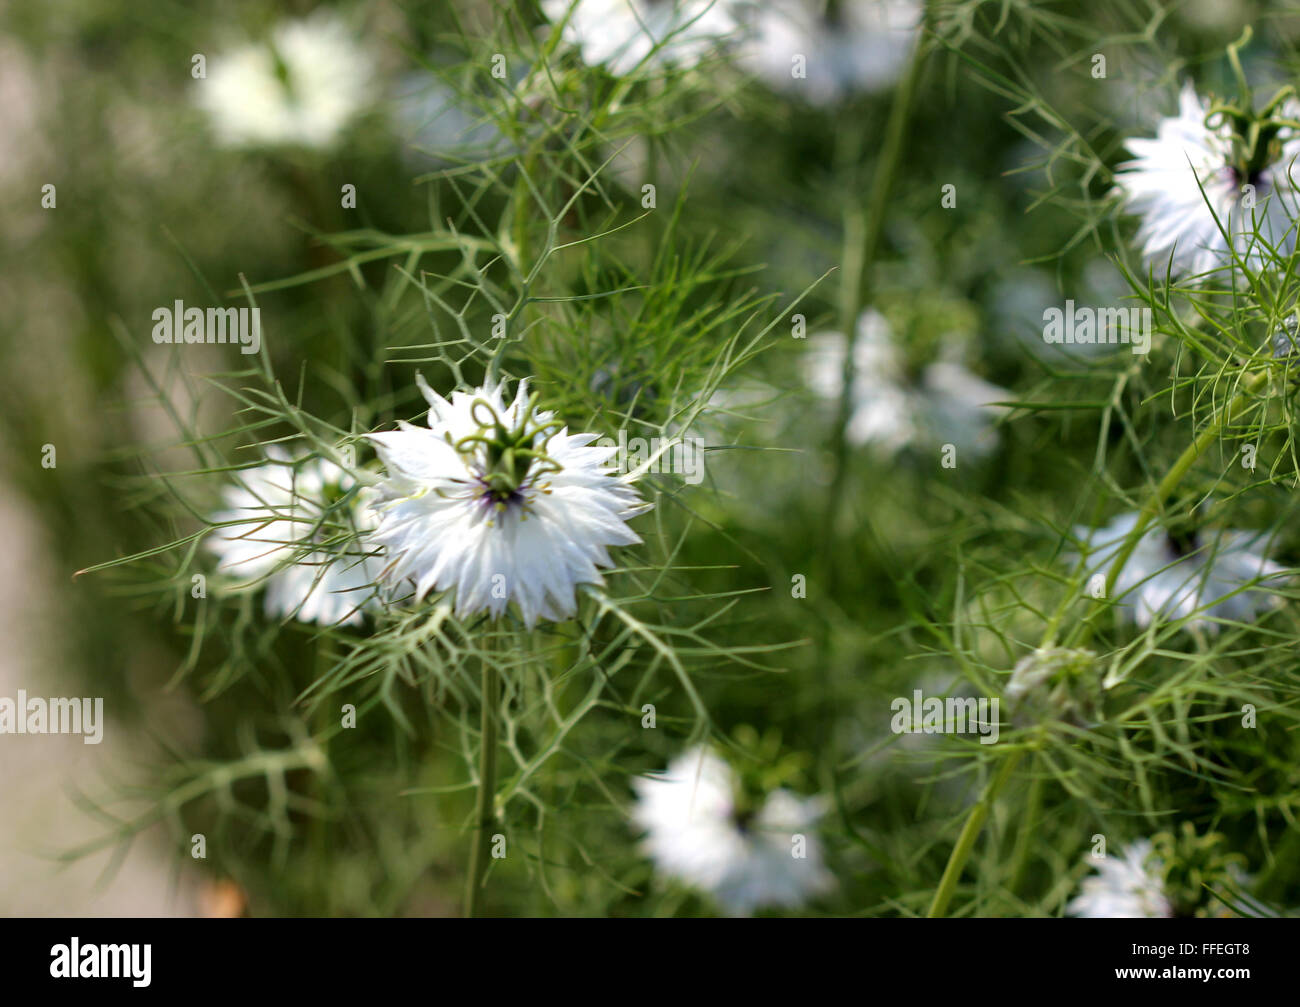 Nigella damascena, love-in-a-mist, ornamental herb with finely dissected leaves, finely dissected leaves and white flowers Stock Photo